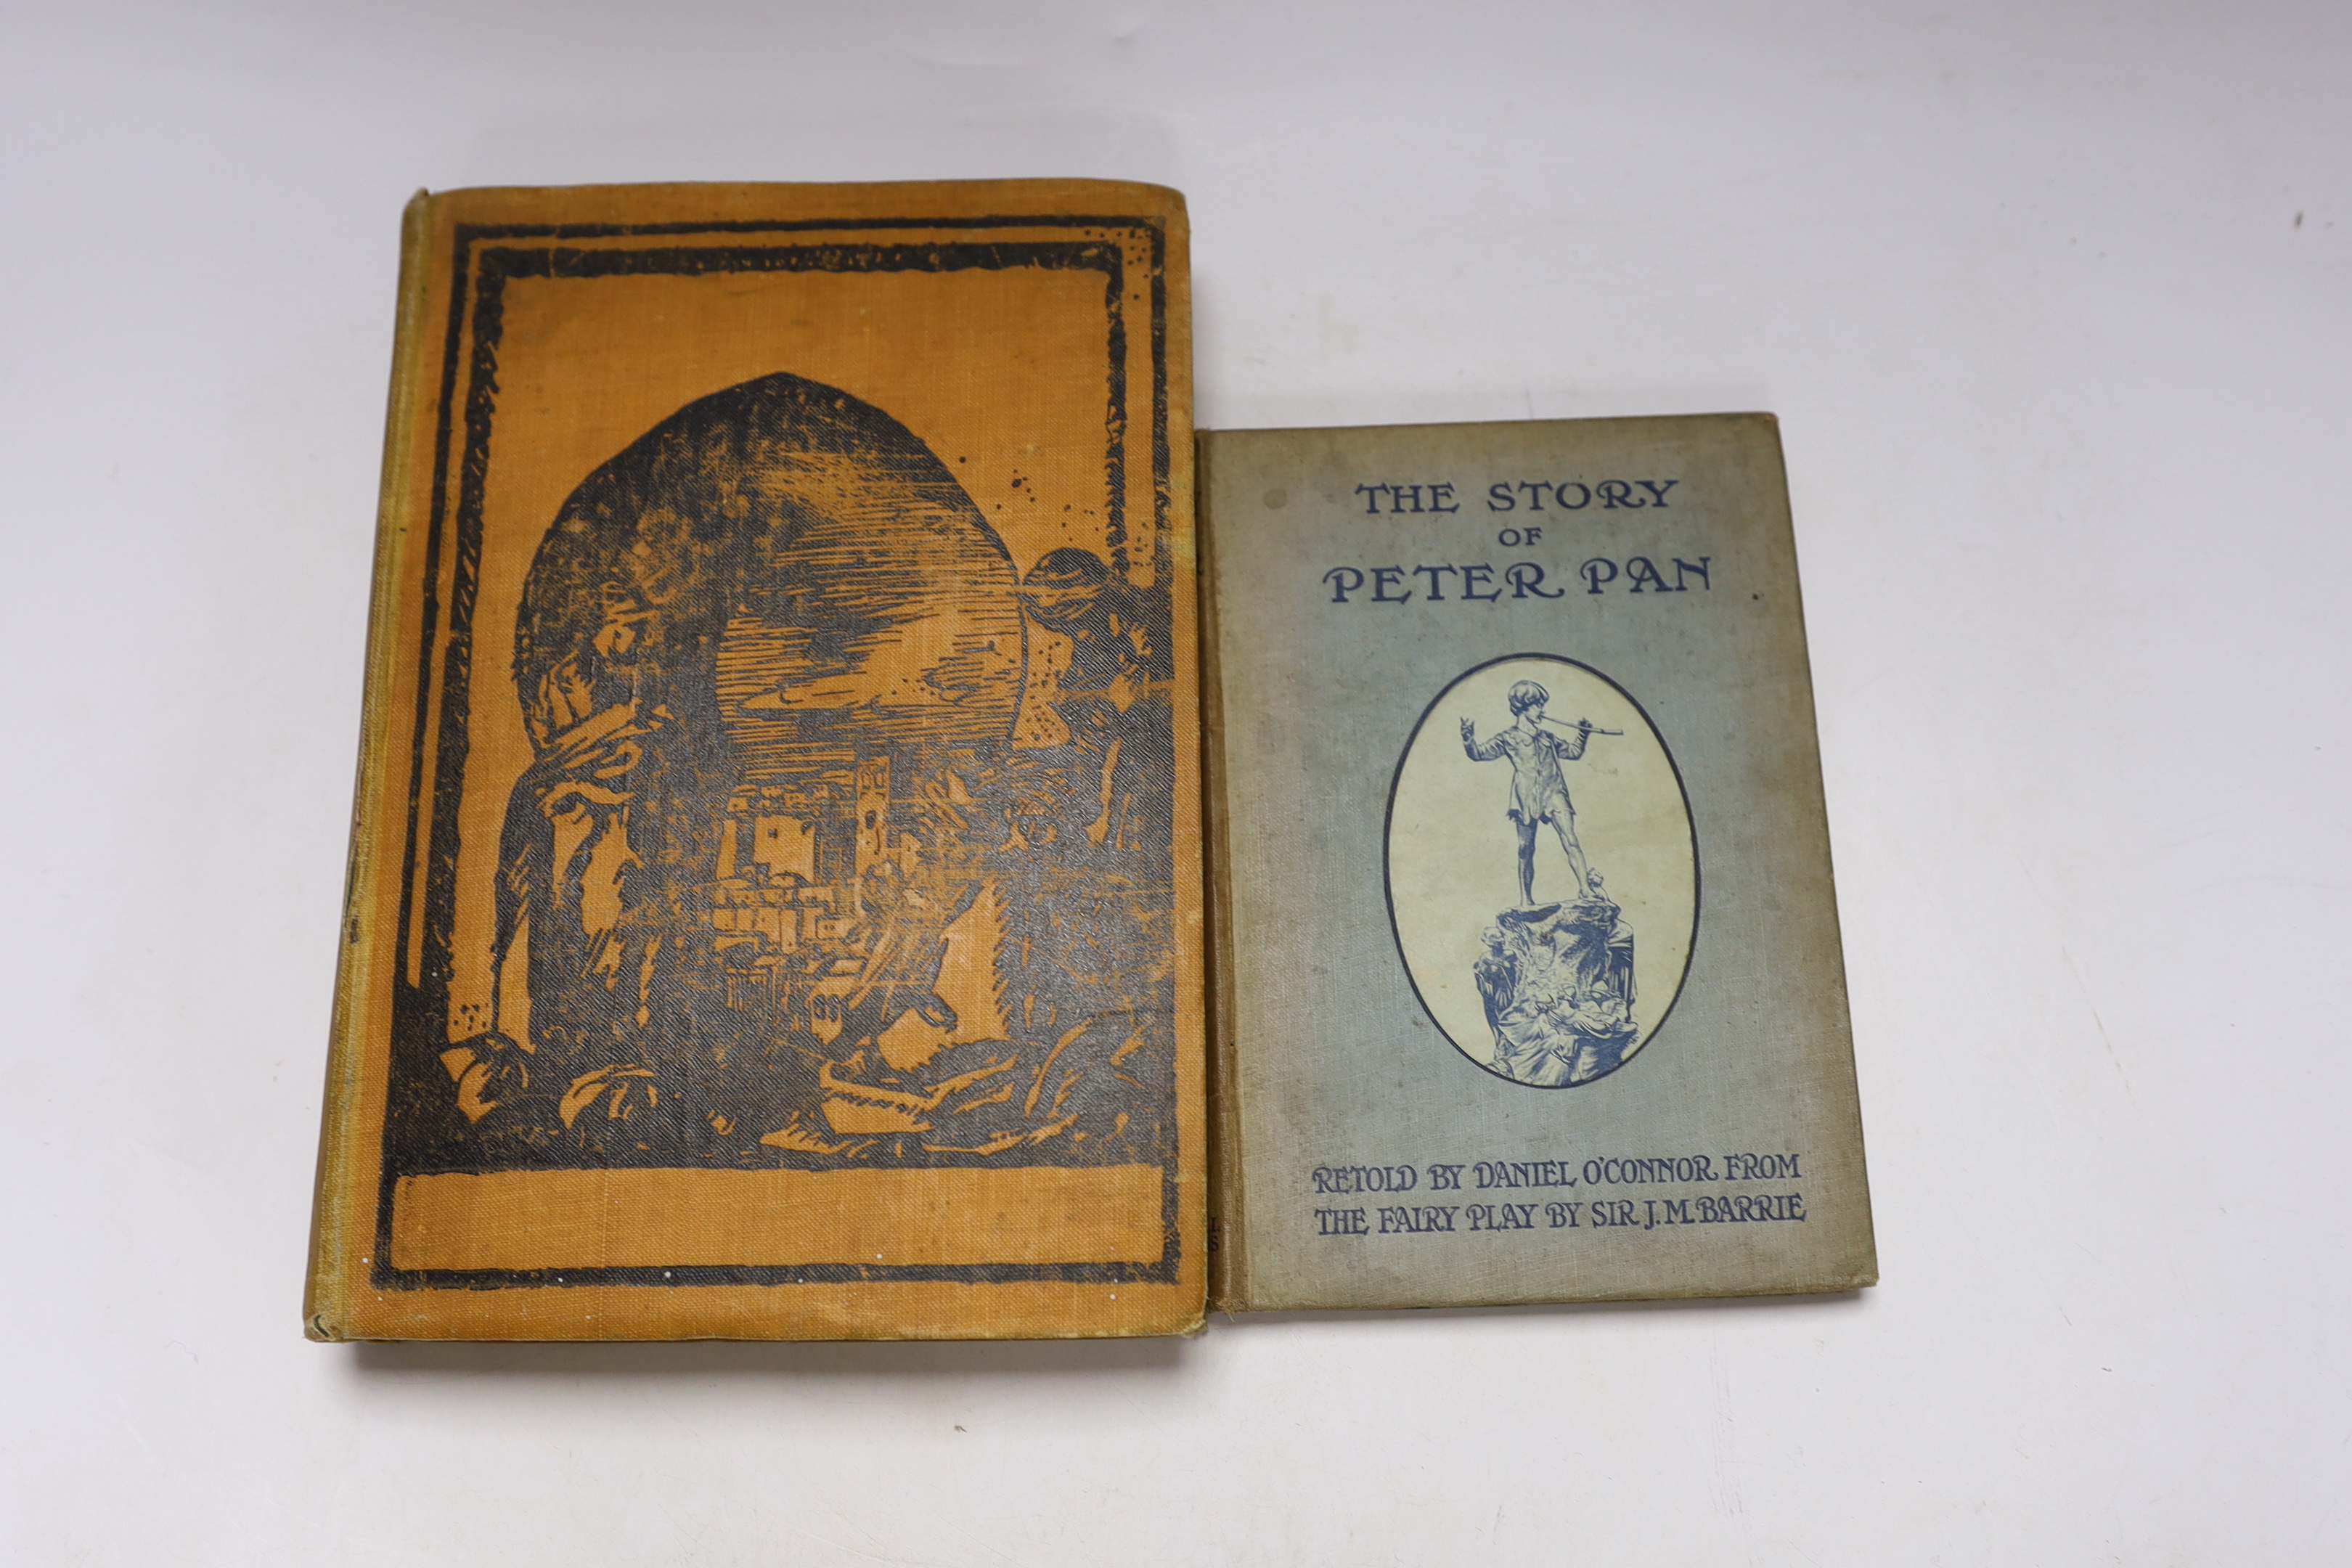 Eothen, illustrated by Frank Brangwyn, Story of Peter Pan and three other children’s books